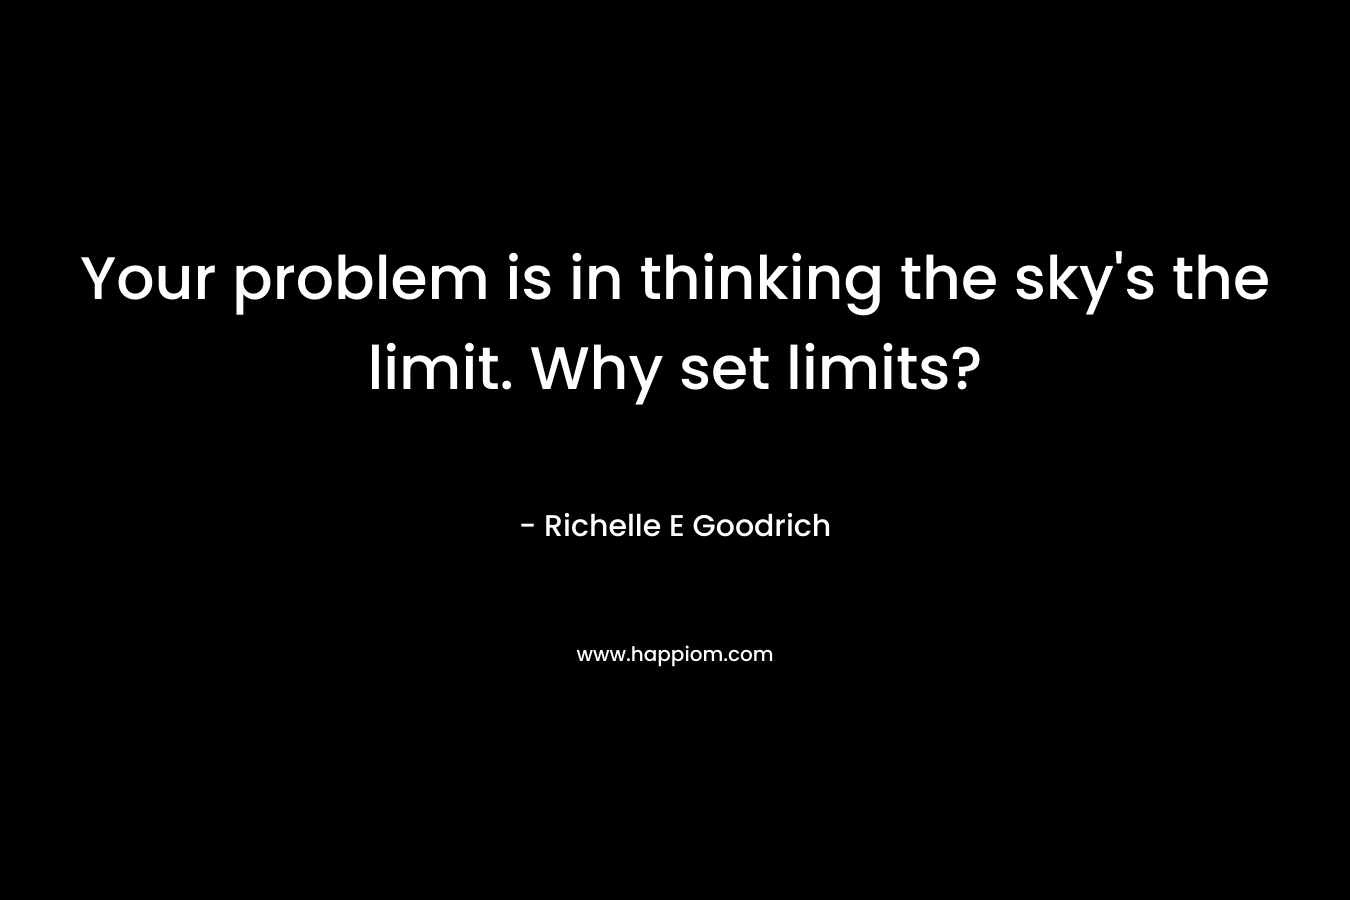 Your problem is in thinking the sky's the limit. Why set limits?